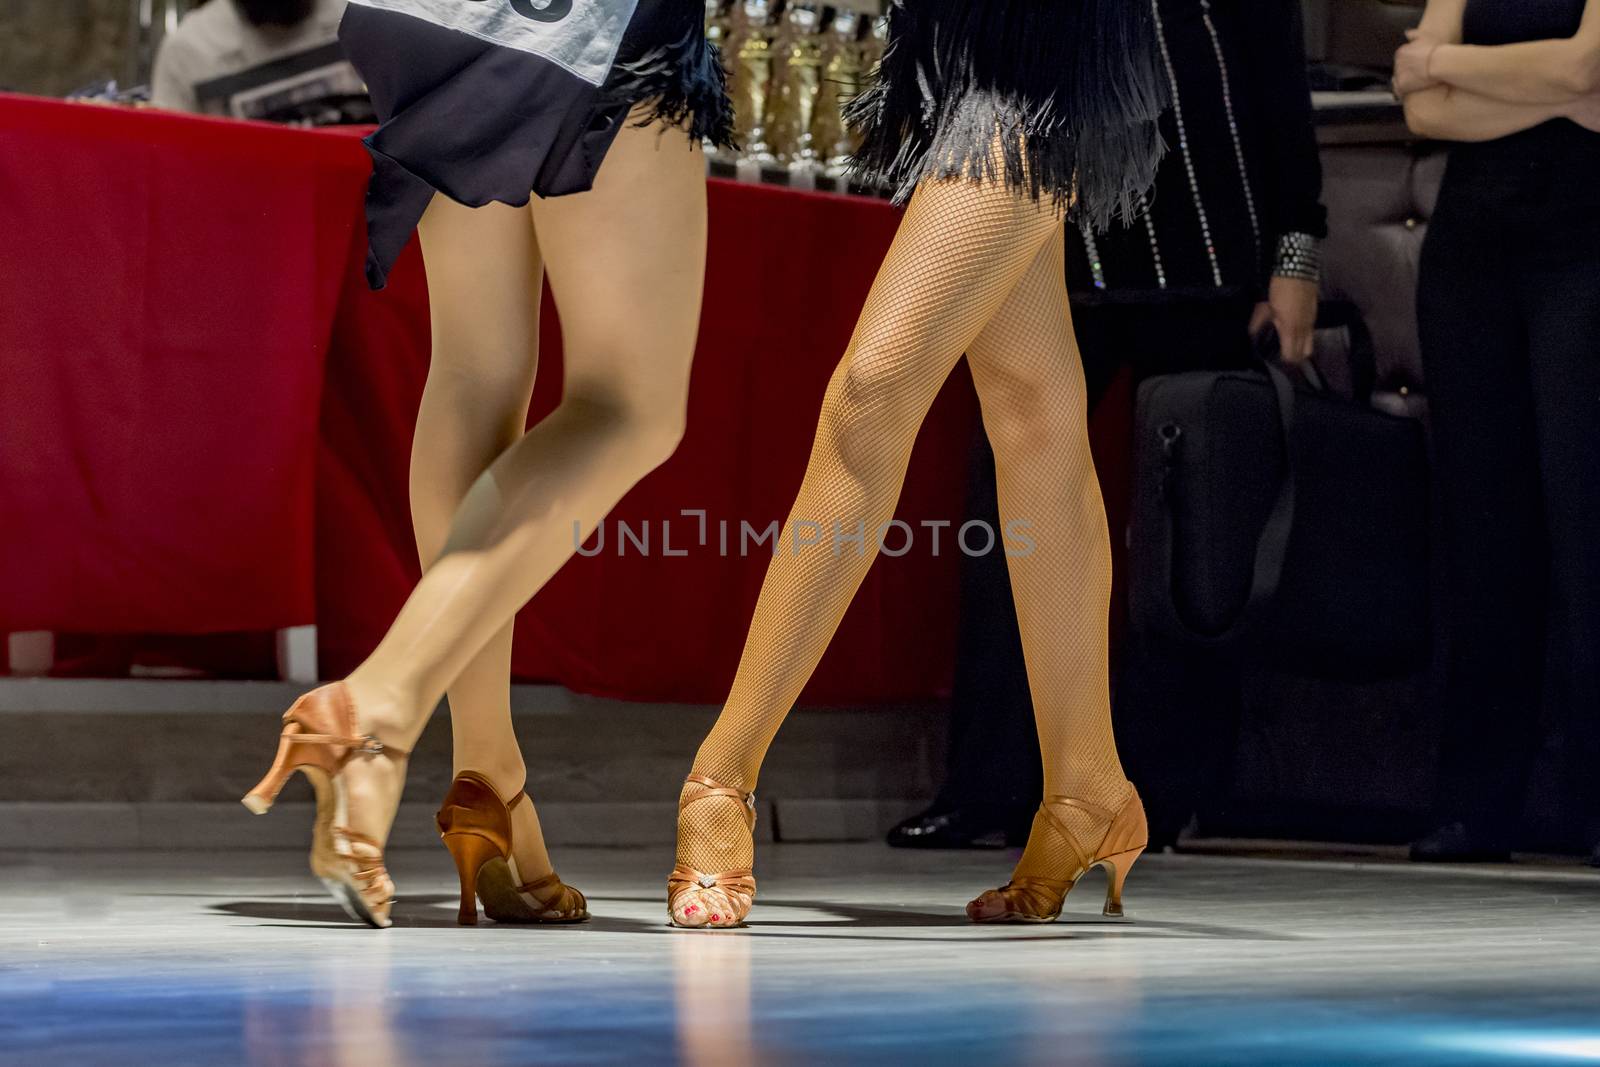 female legs of young girls who dance in competition